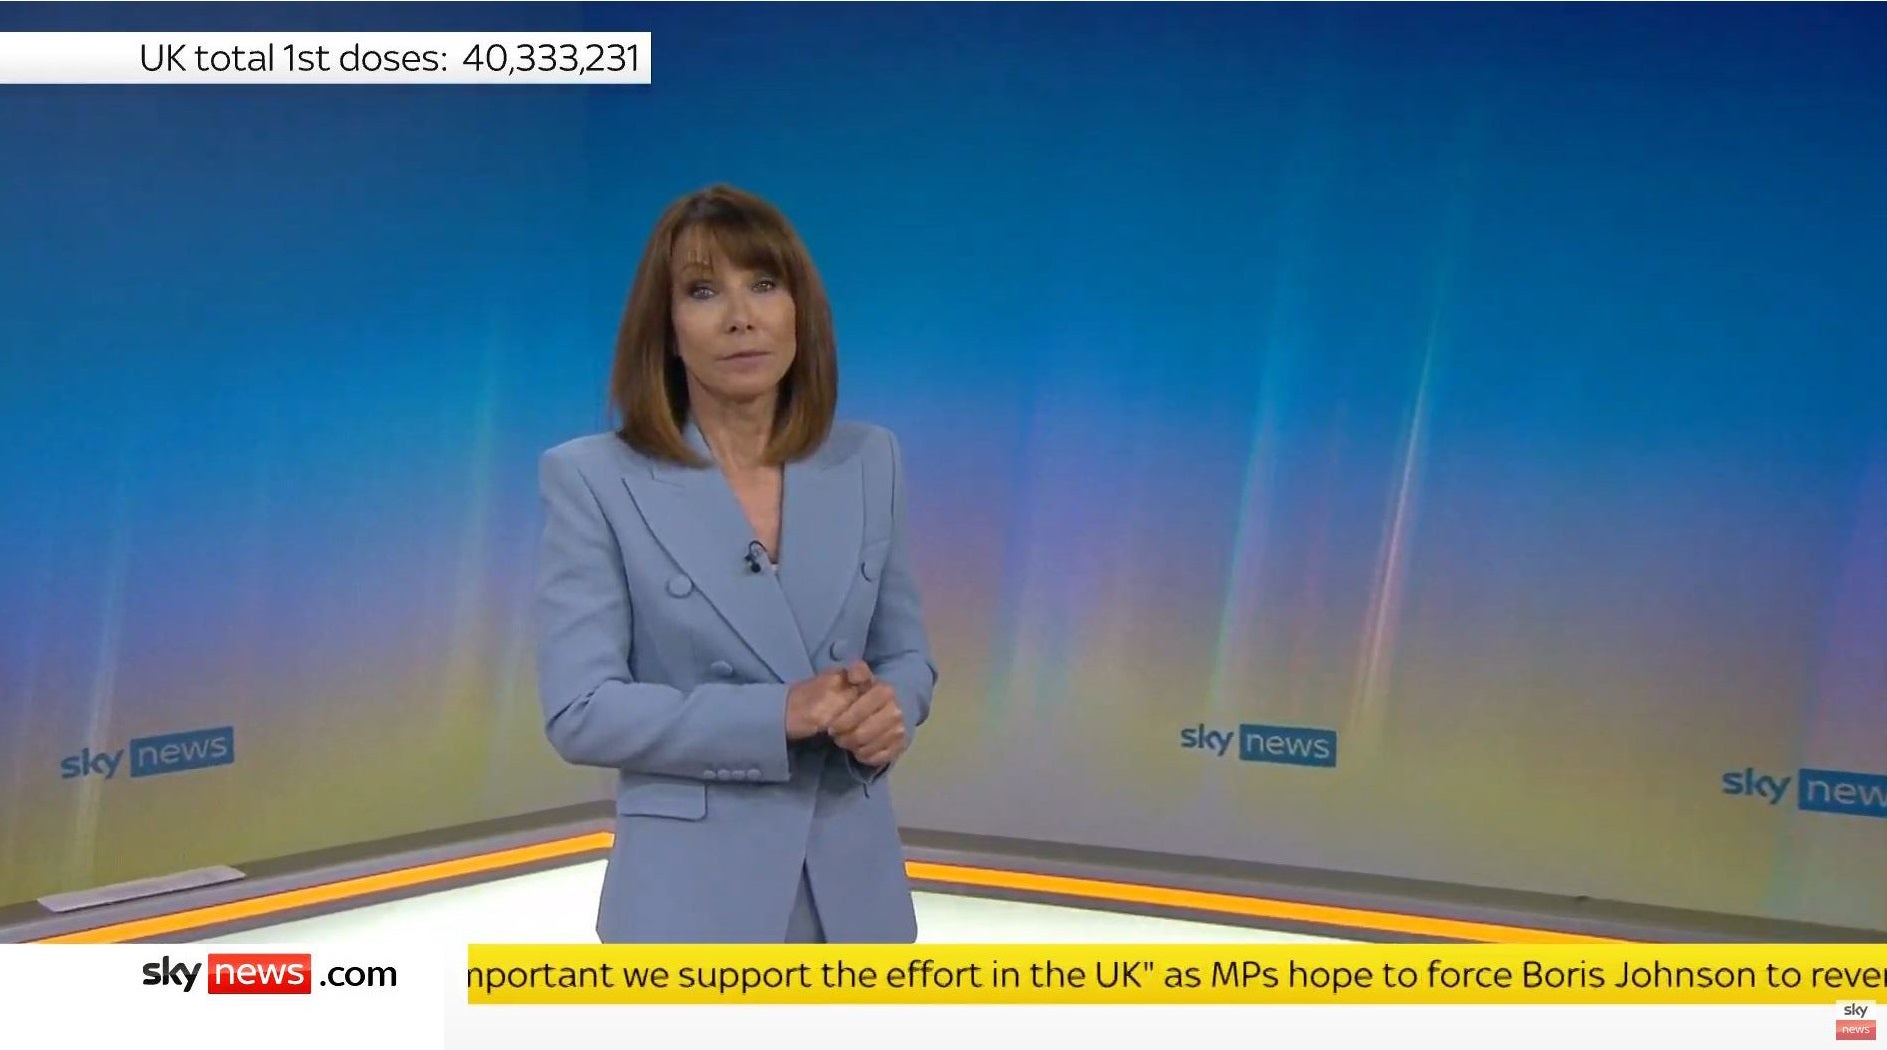 Sky News presenter Kay Burley has returned to work after a six-month suspension for breaking Covid-19 rules